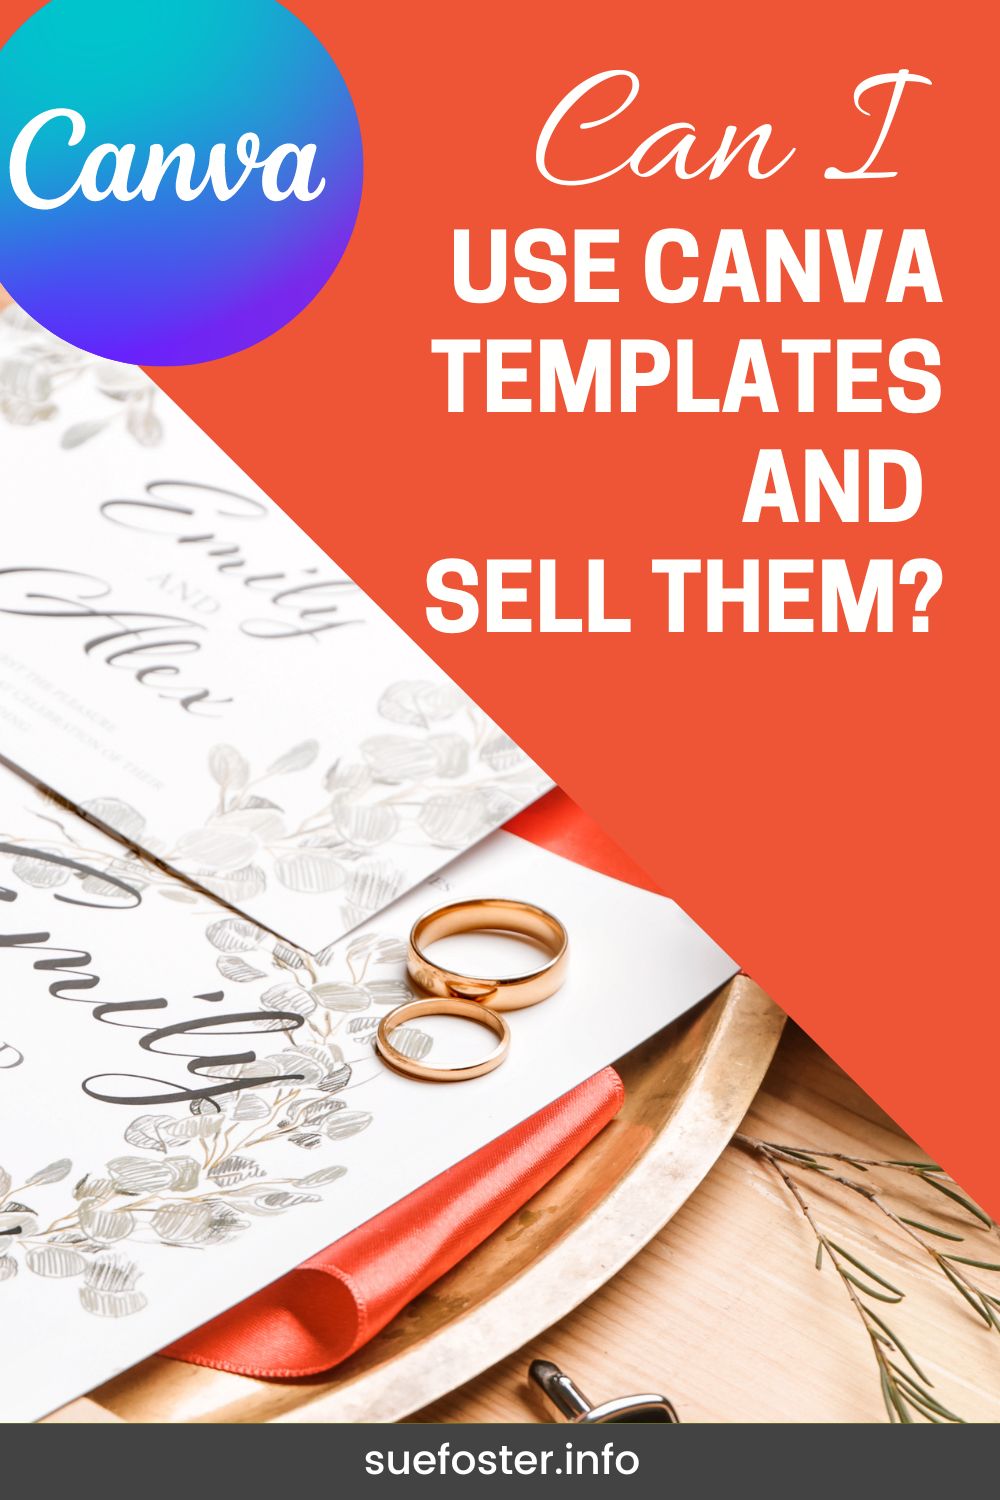 Learn how to use Canva templates for commercial purposes. Follow guidelines on licensing, Pro Content, and best practices to create and sell original designs legally.